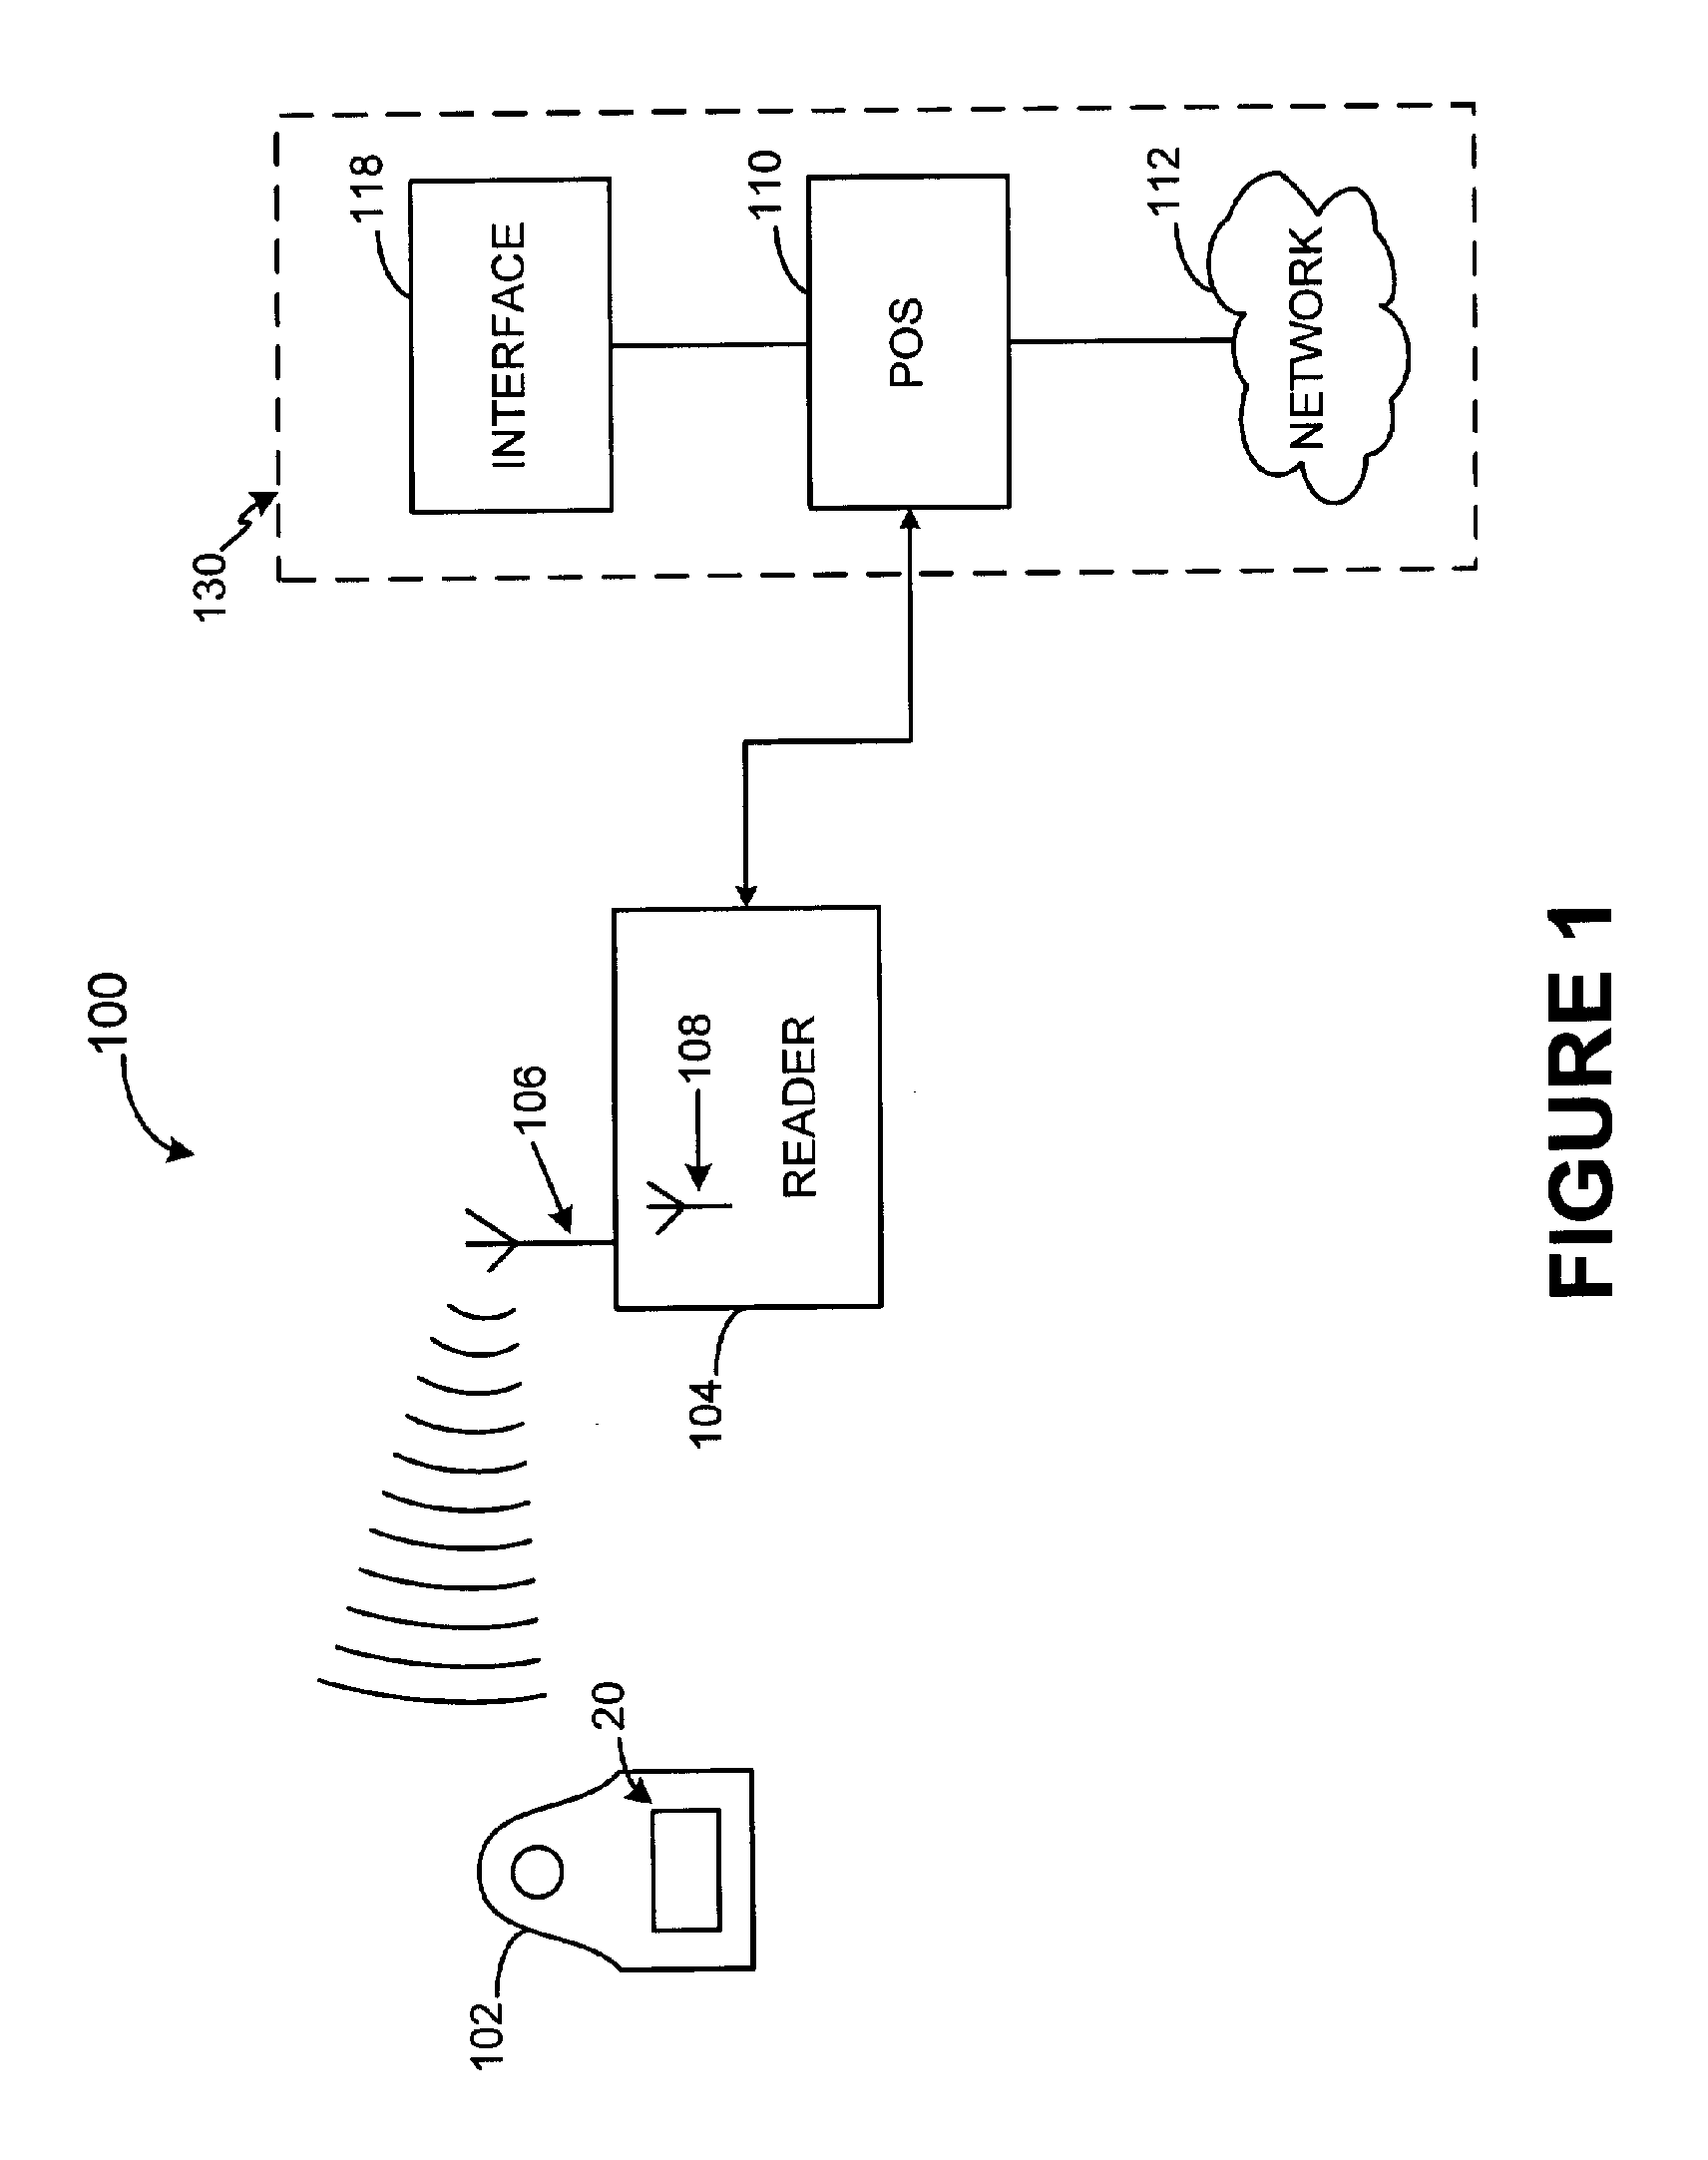 System and method for remotely initializing a RF transaction